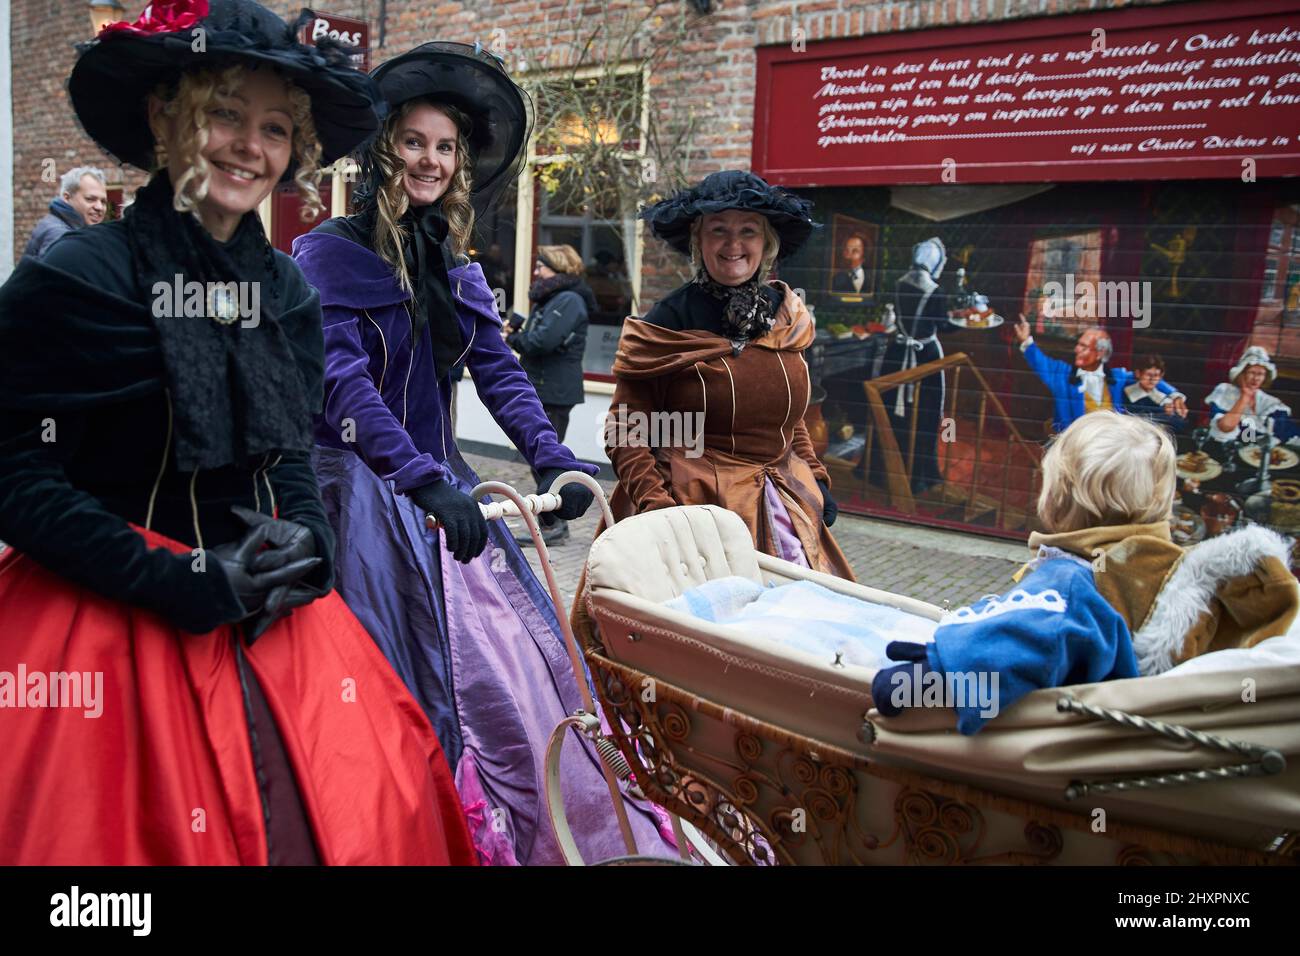 A group of participants walk around dressed in period costumes with an old baby carriage Stock Photo